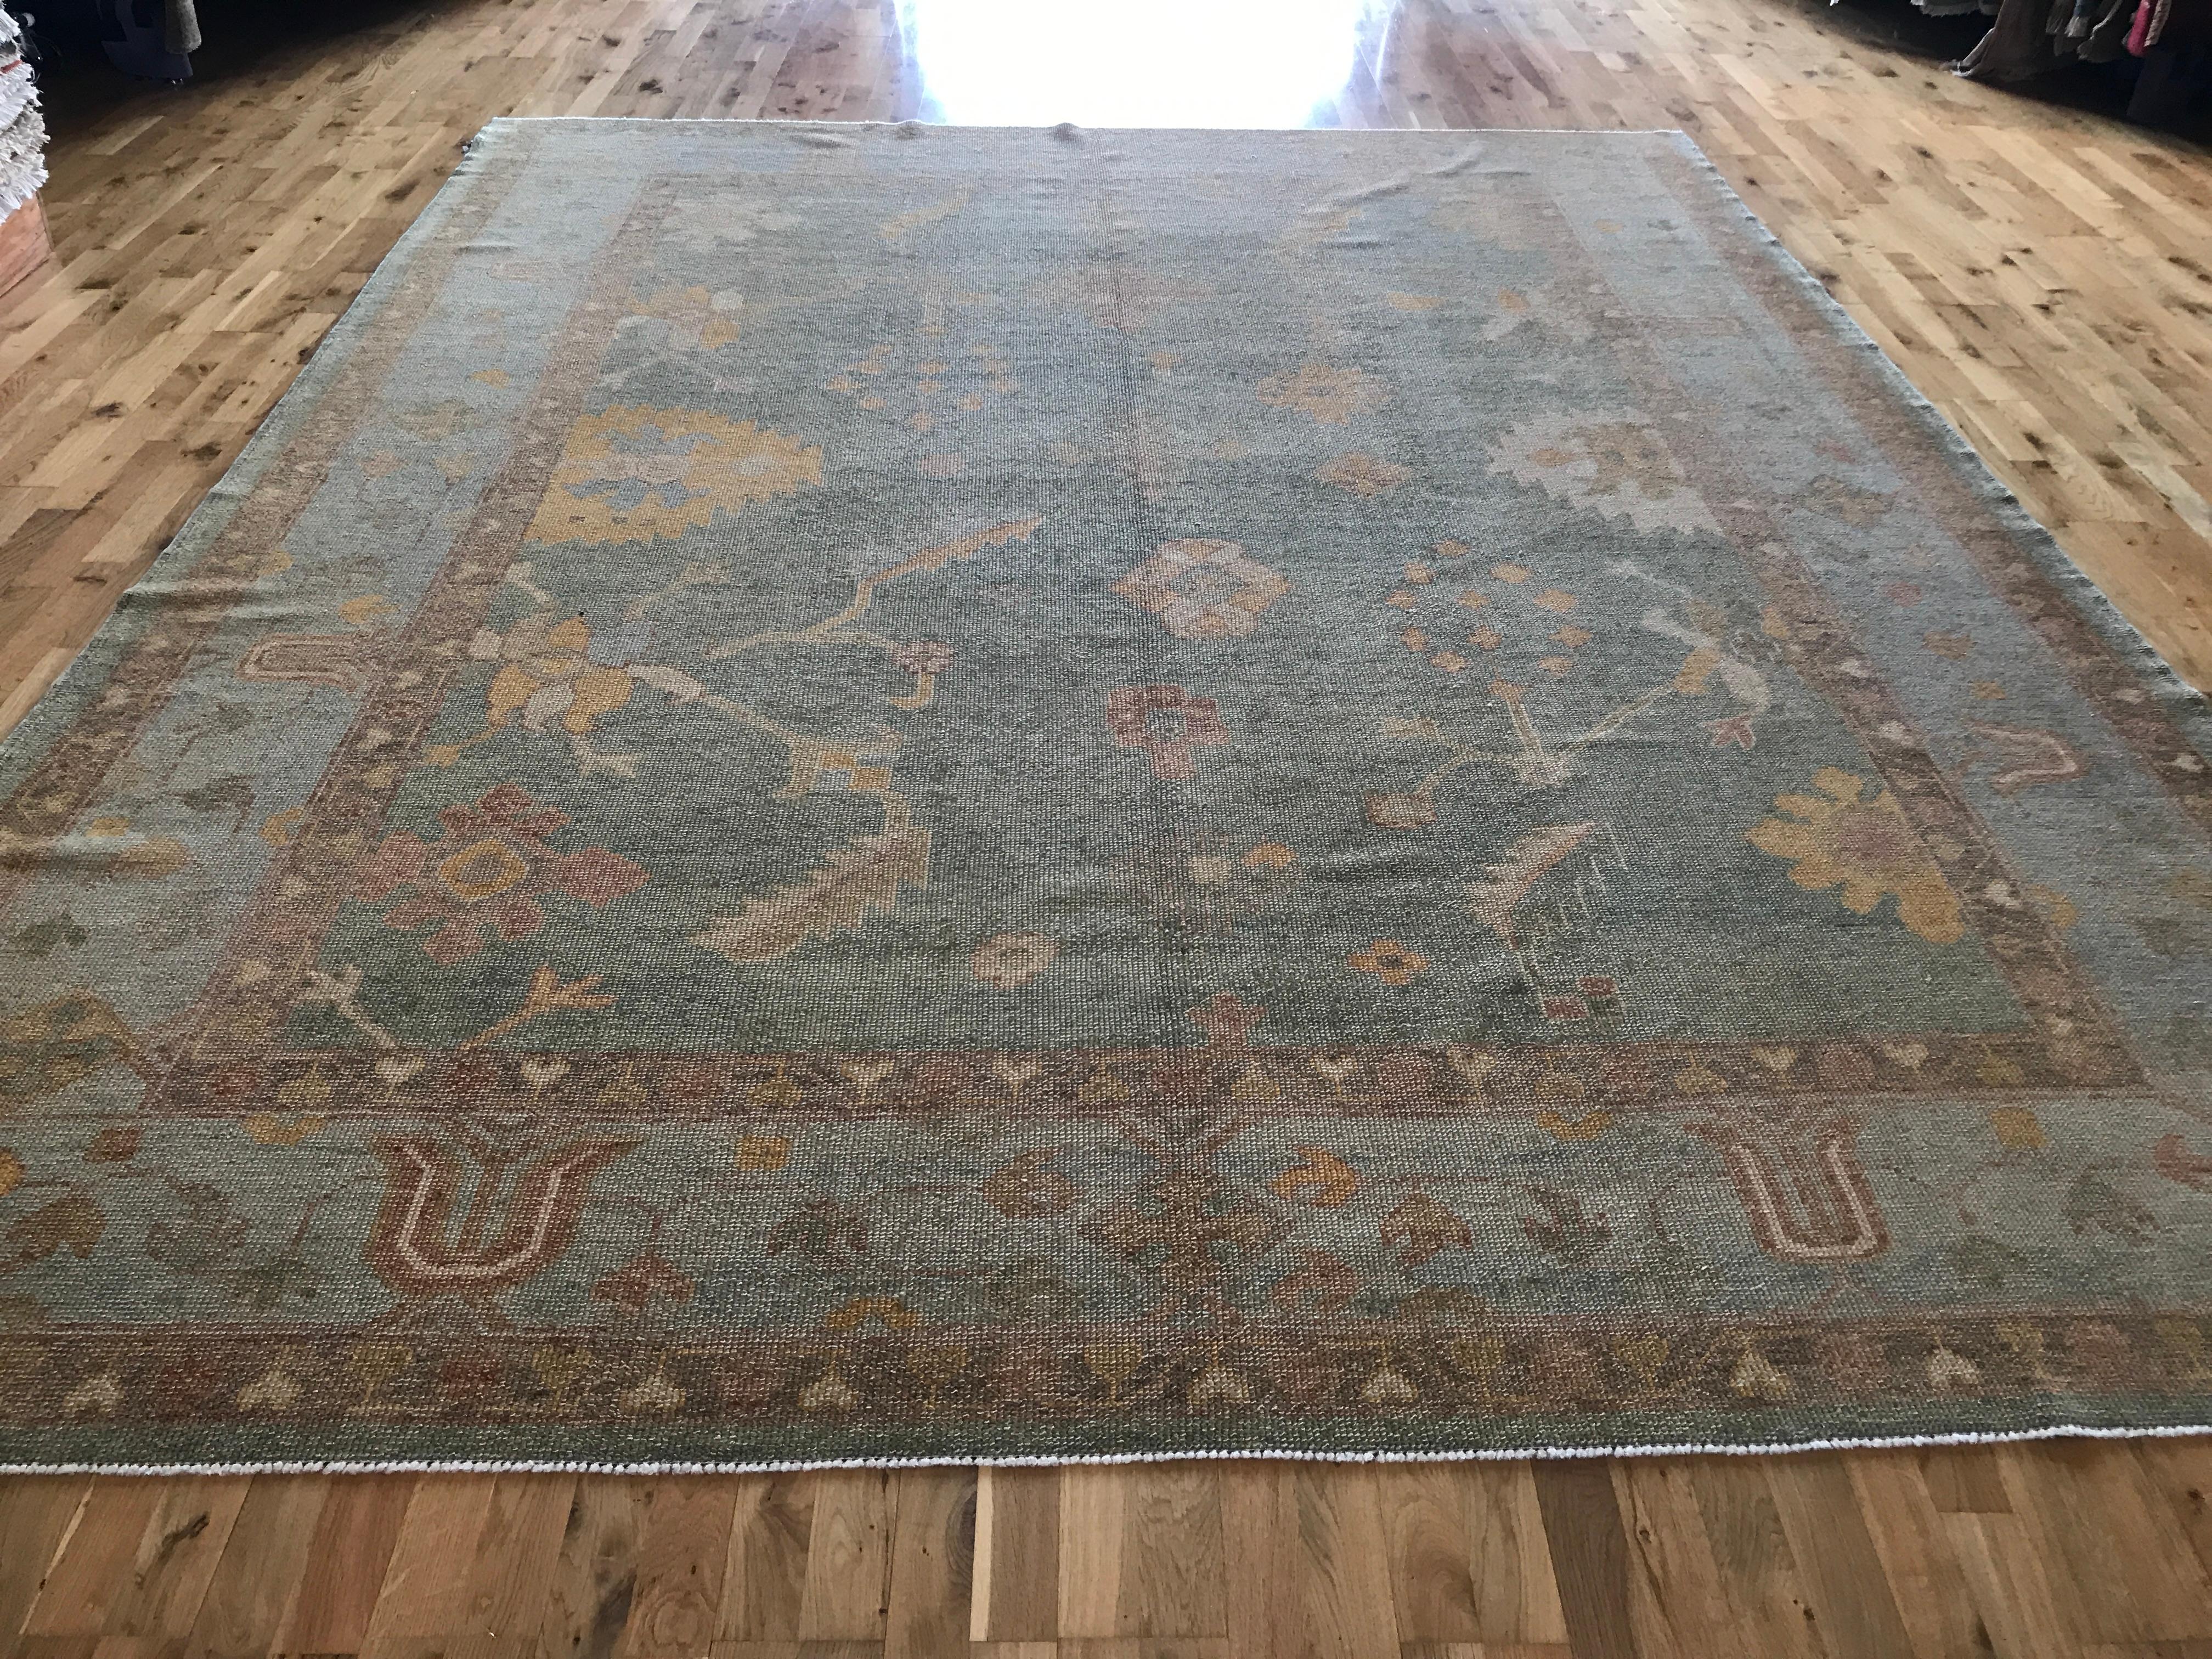 A contemporary take on a centuries-old style known for its tame, calming quality. With its large center panel floral design this piece carries on the storied Oushak tradition. All wool. Hand knotted in Turkey using vegetal dyes.